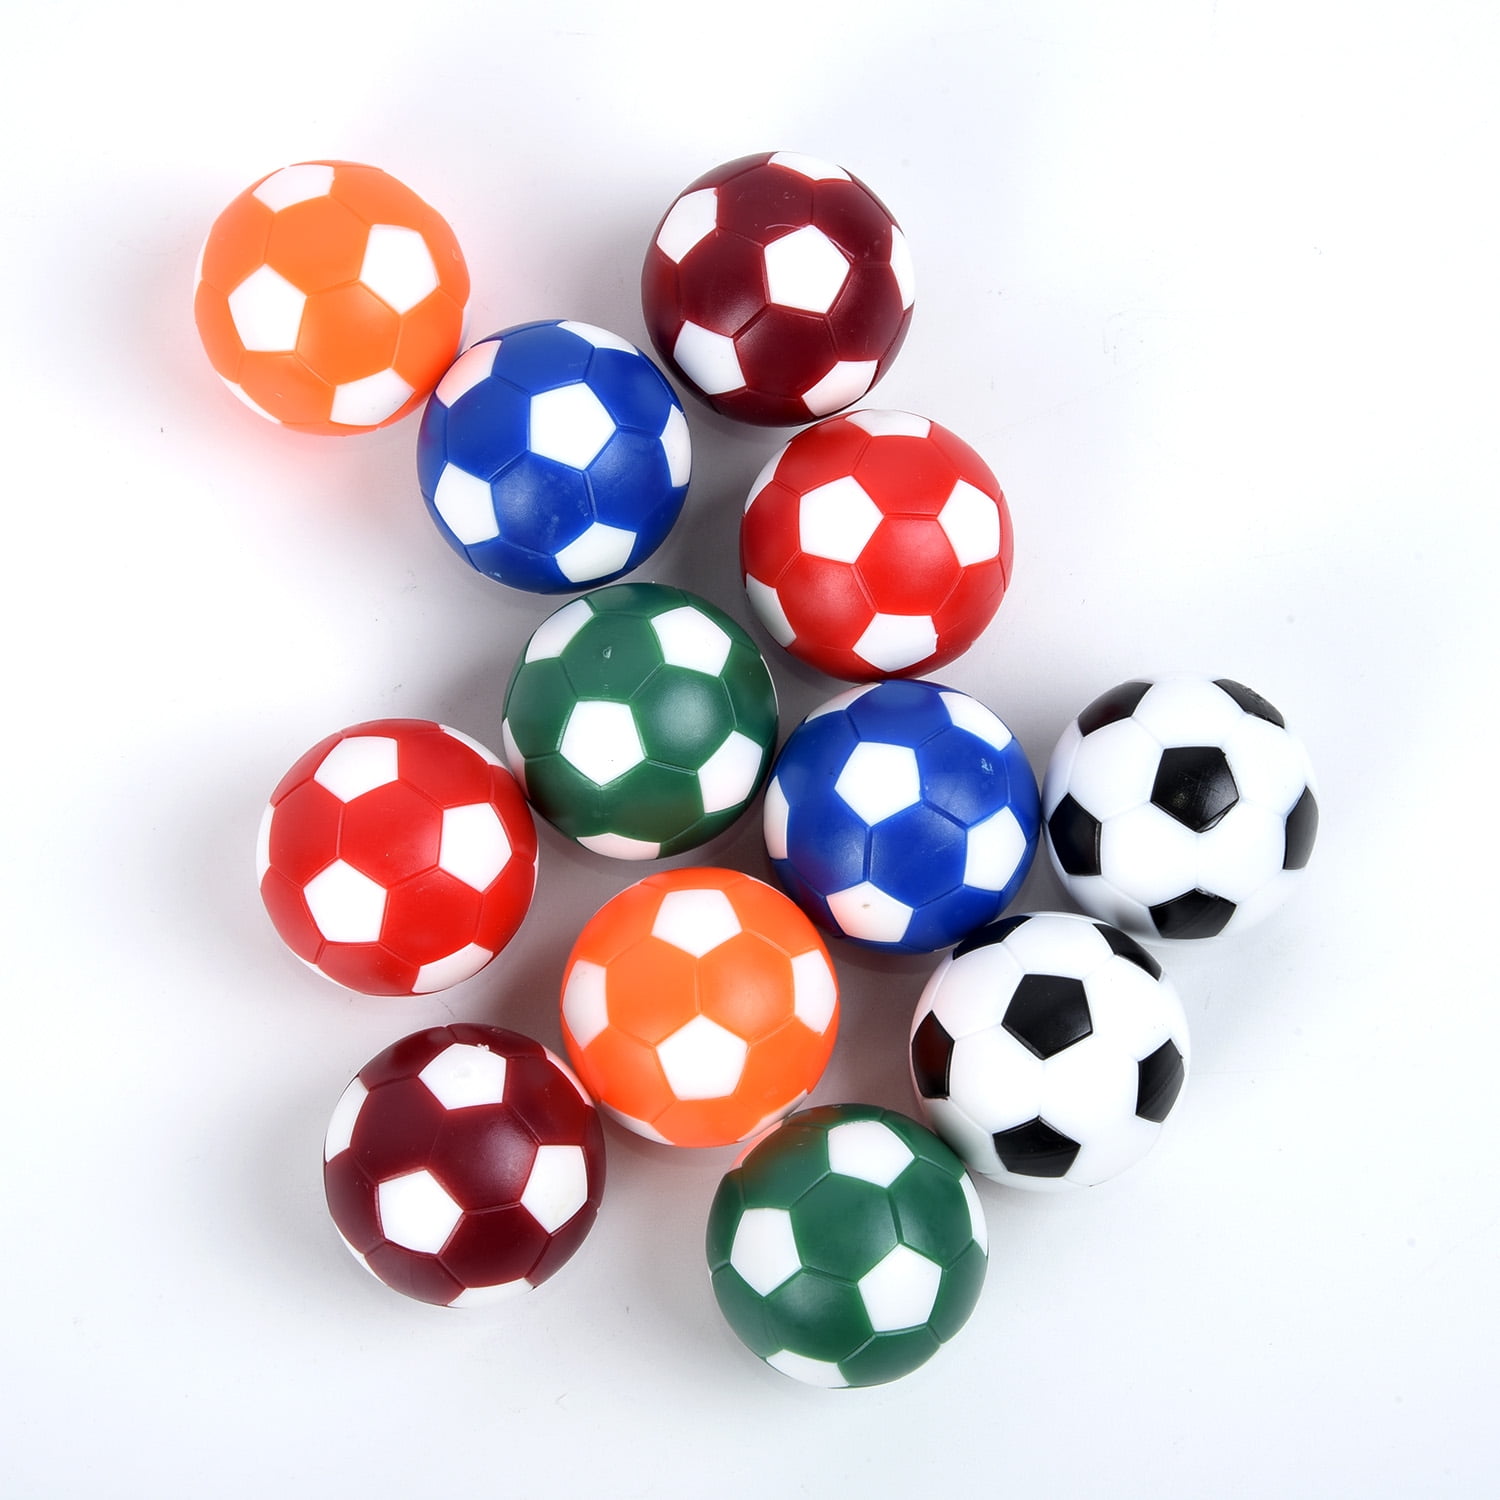 4Pc 36mm Soccer Table Foosball Replacement Plastic Fast Ball Football C8C1 